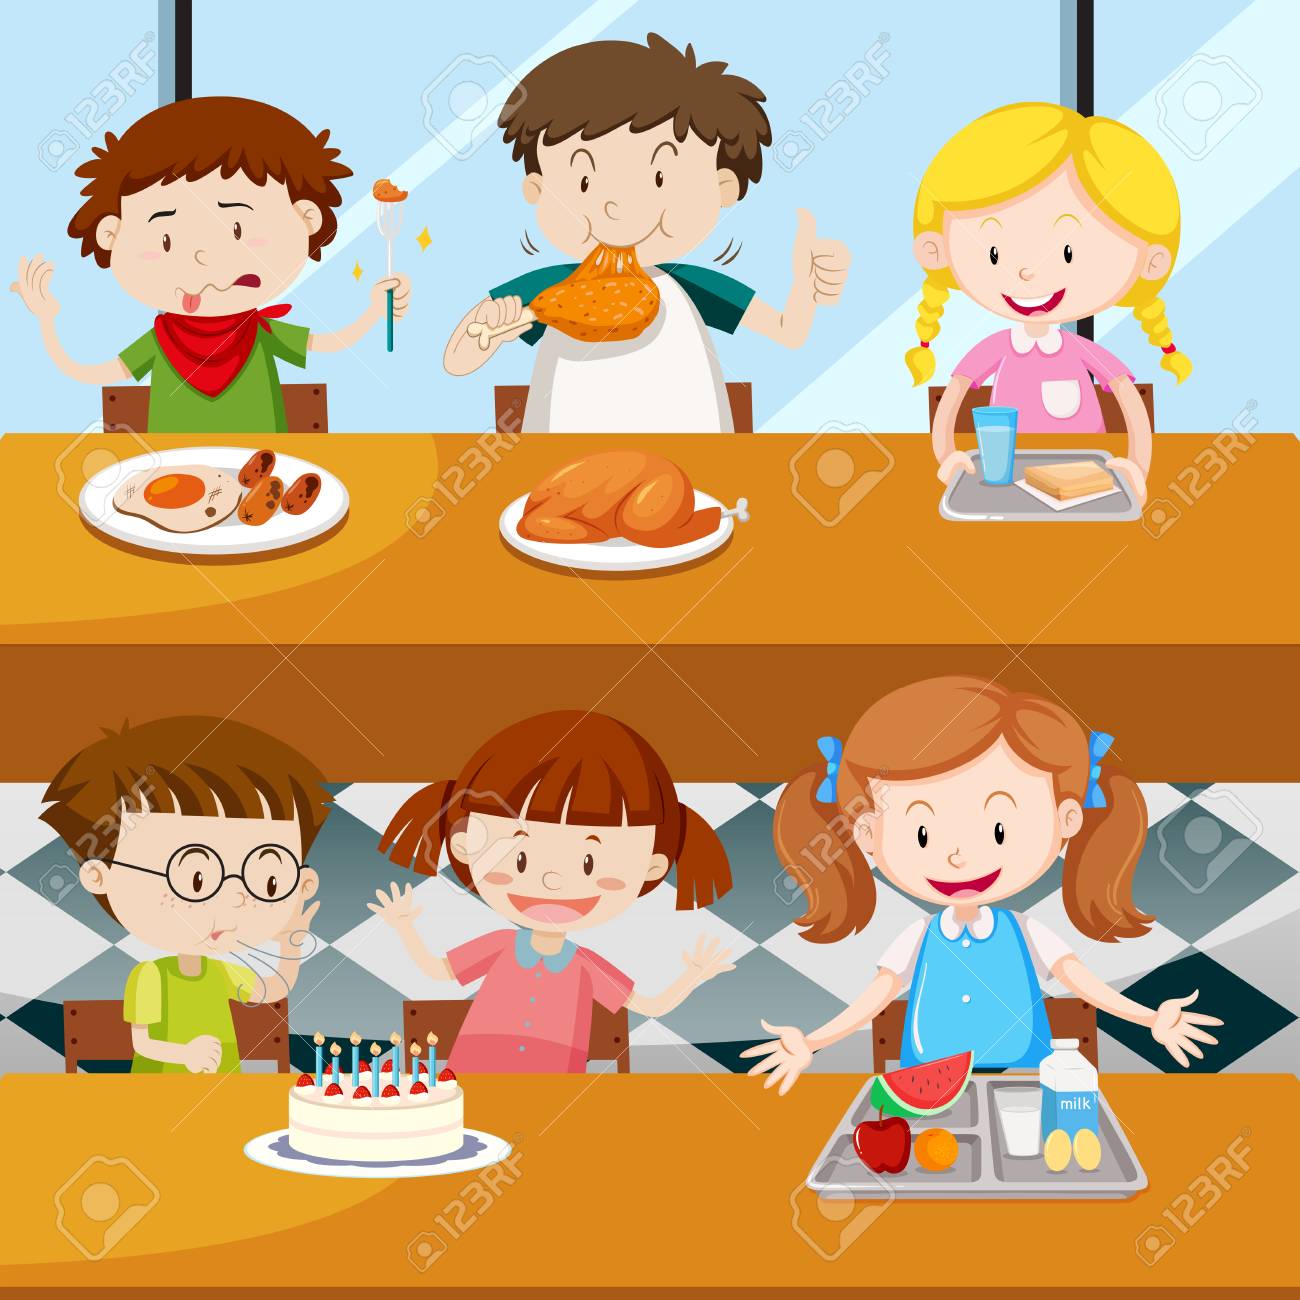 Many kids eating in the canteen illustration..